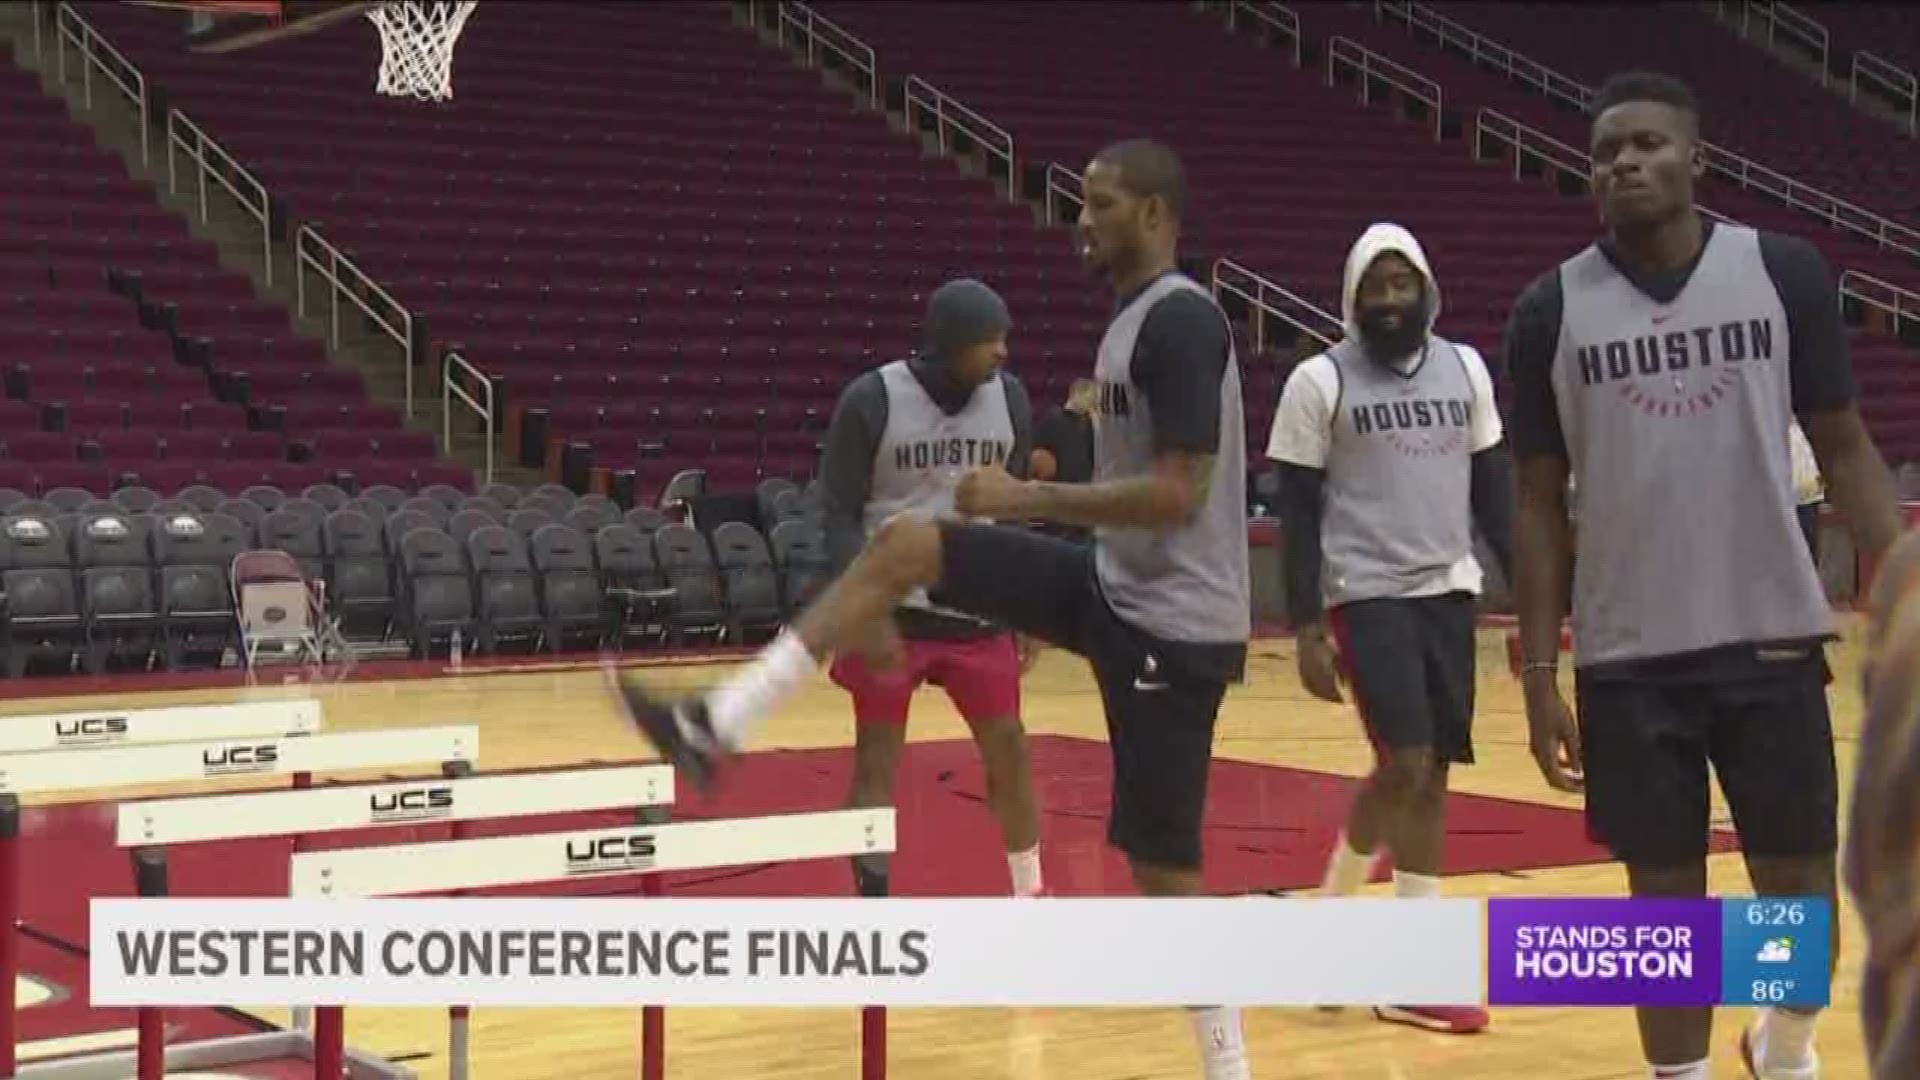 The Houston Rockets practiced Saturday ahead of their series opener against the Golden State Warriors Monday night.